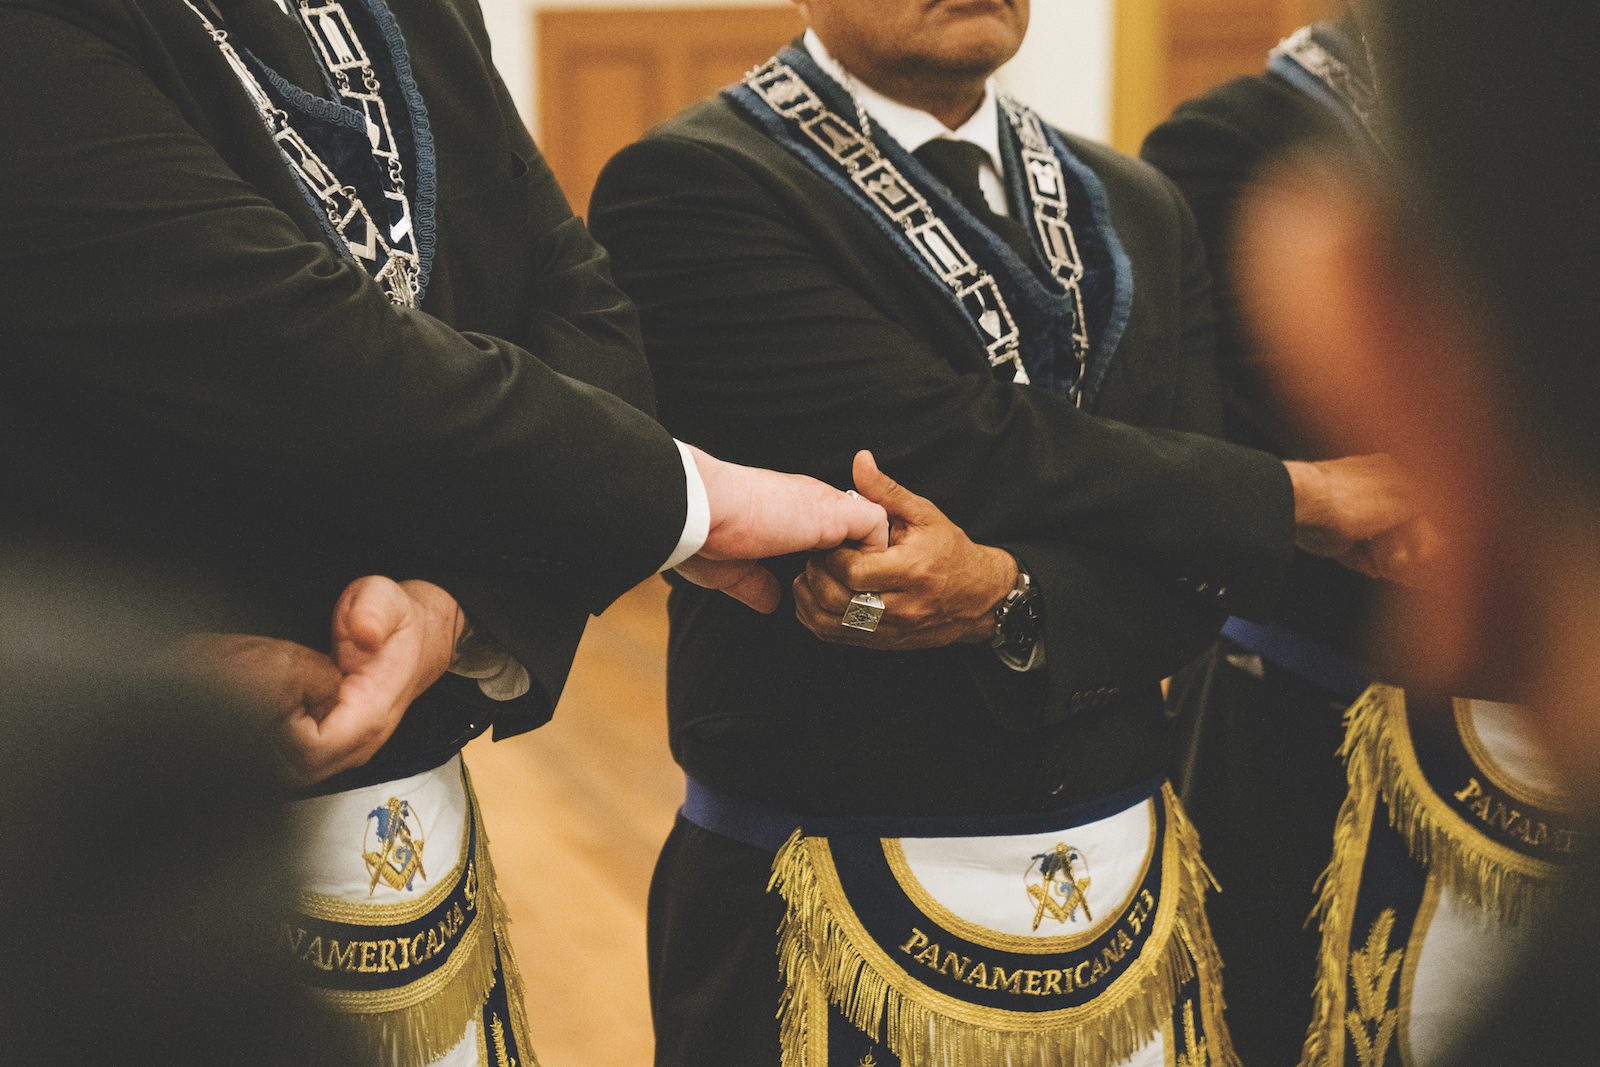 Members of Panamerica Lodge No. 513 form a chain of unity. Panamericana No. 513 is one of two Spanish-speaking Masonic lodges in California.